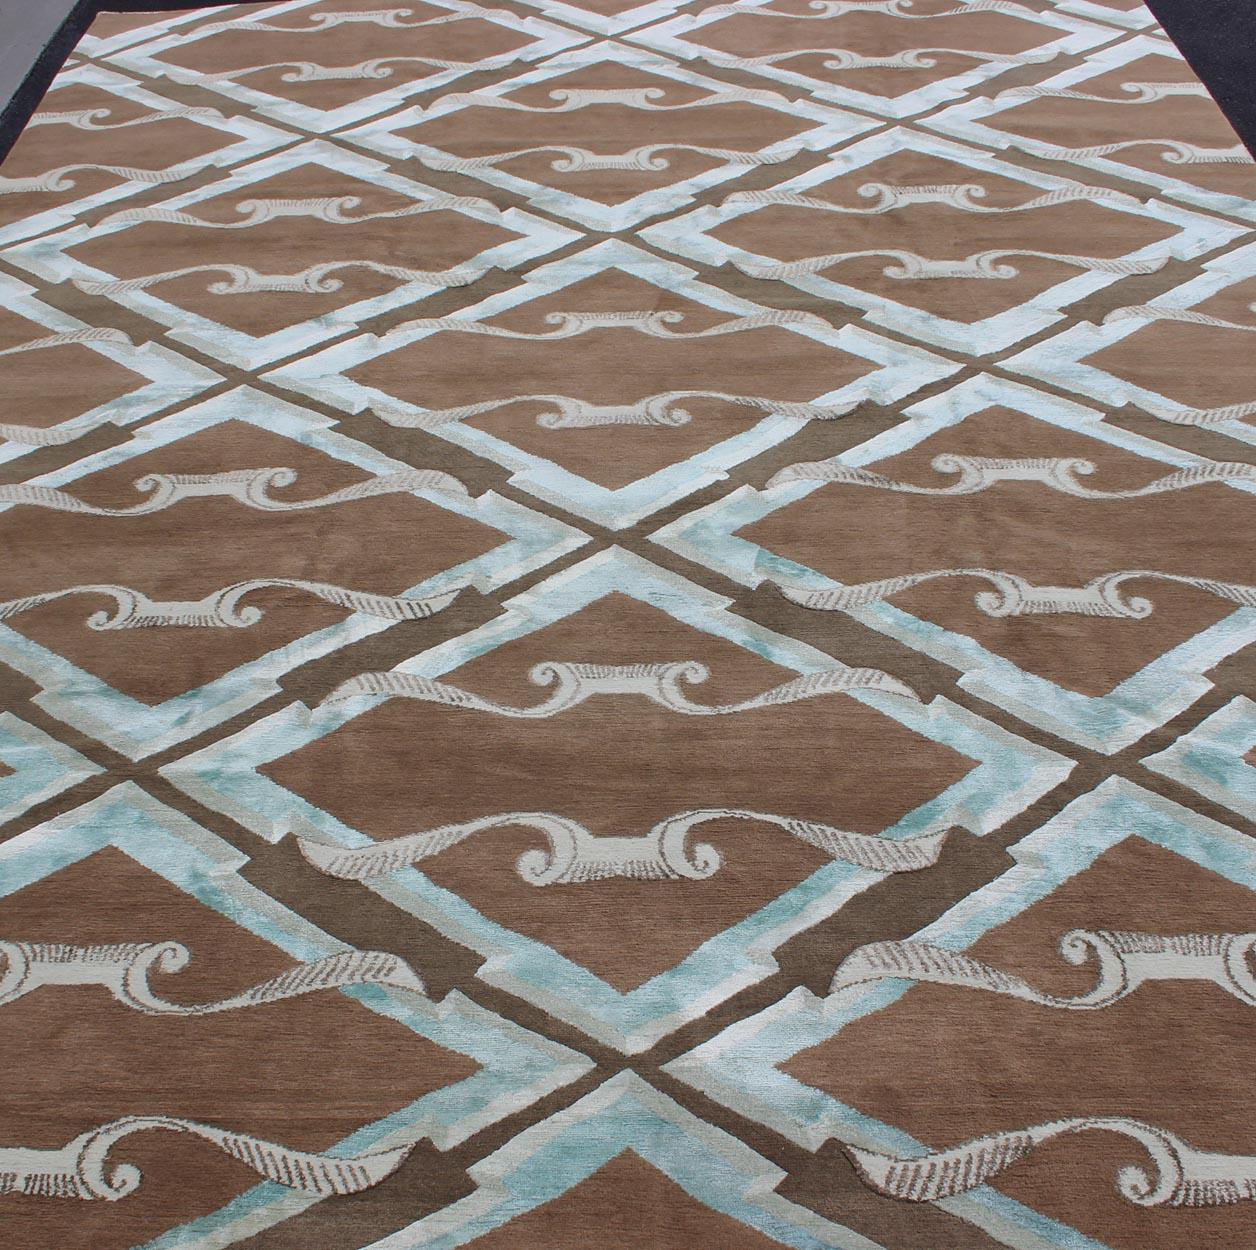 Pure Silk and Wool Nepalese Modern Design Rug in Brown, Blue and Diamond Design 2